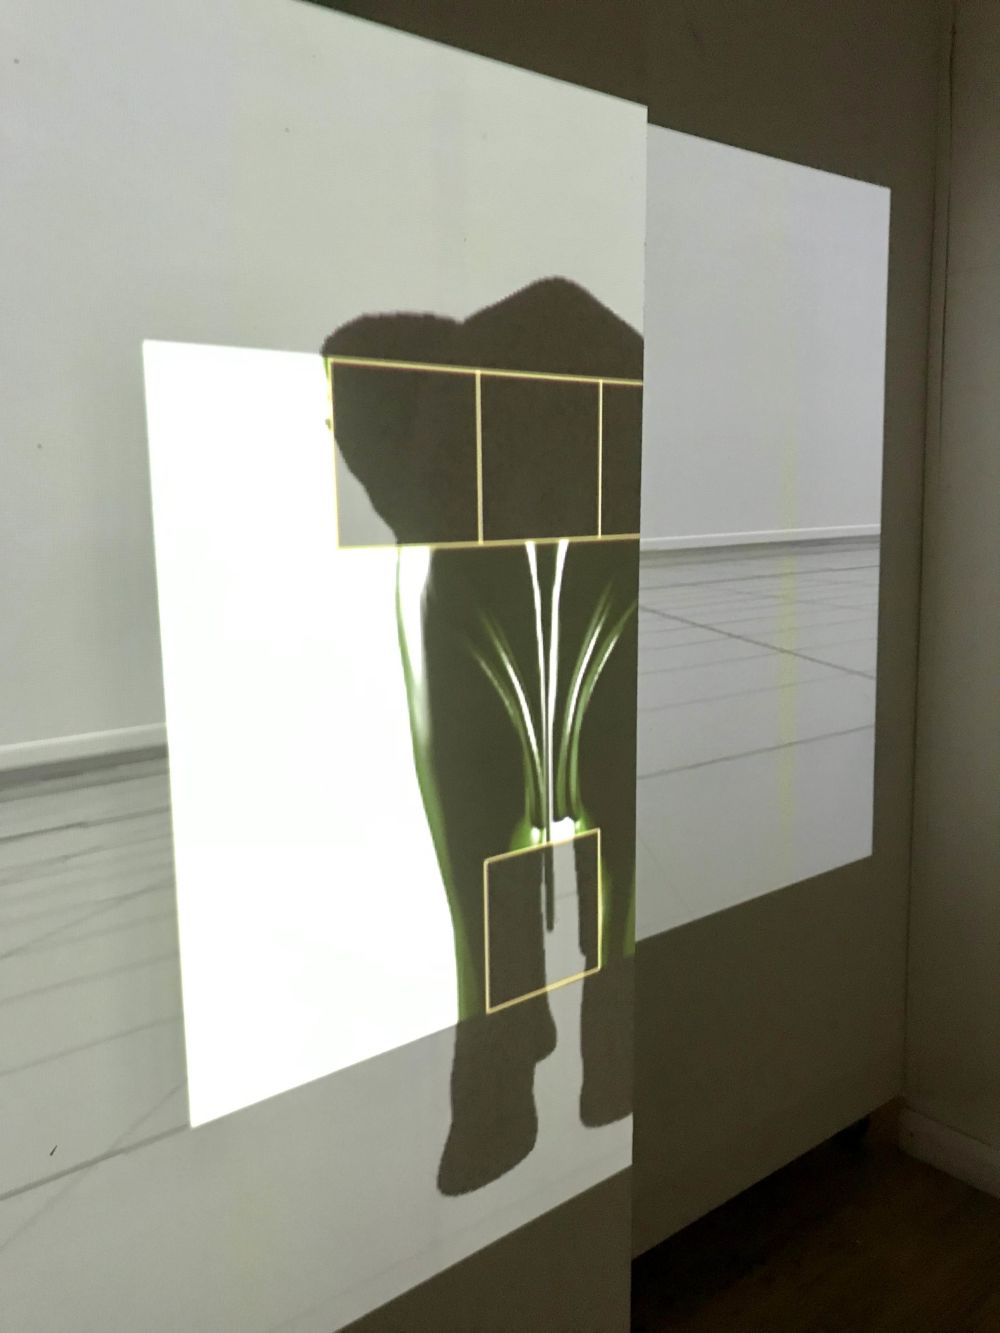 Image of student work projection as part of project